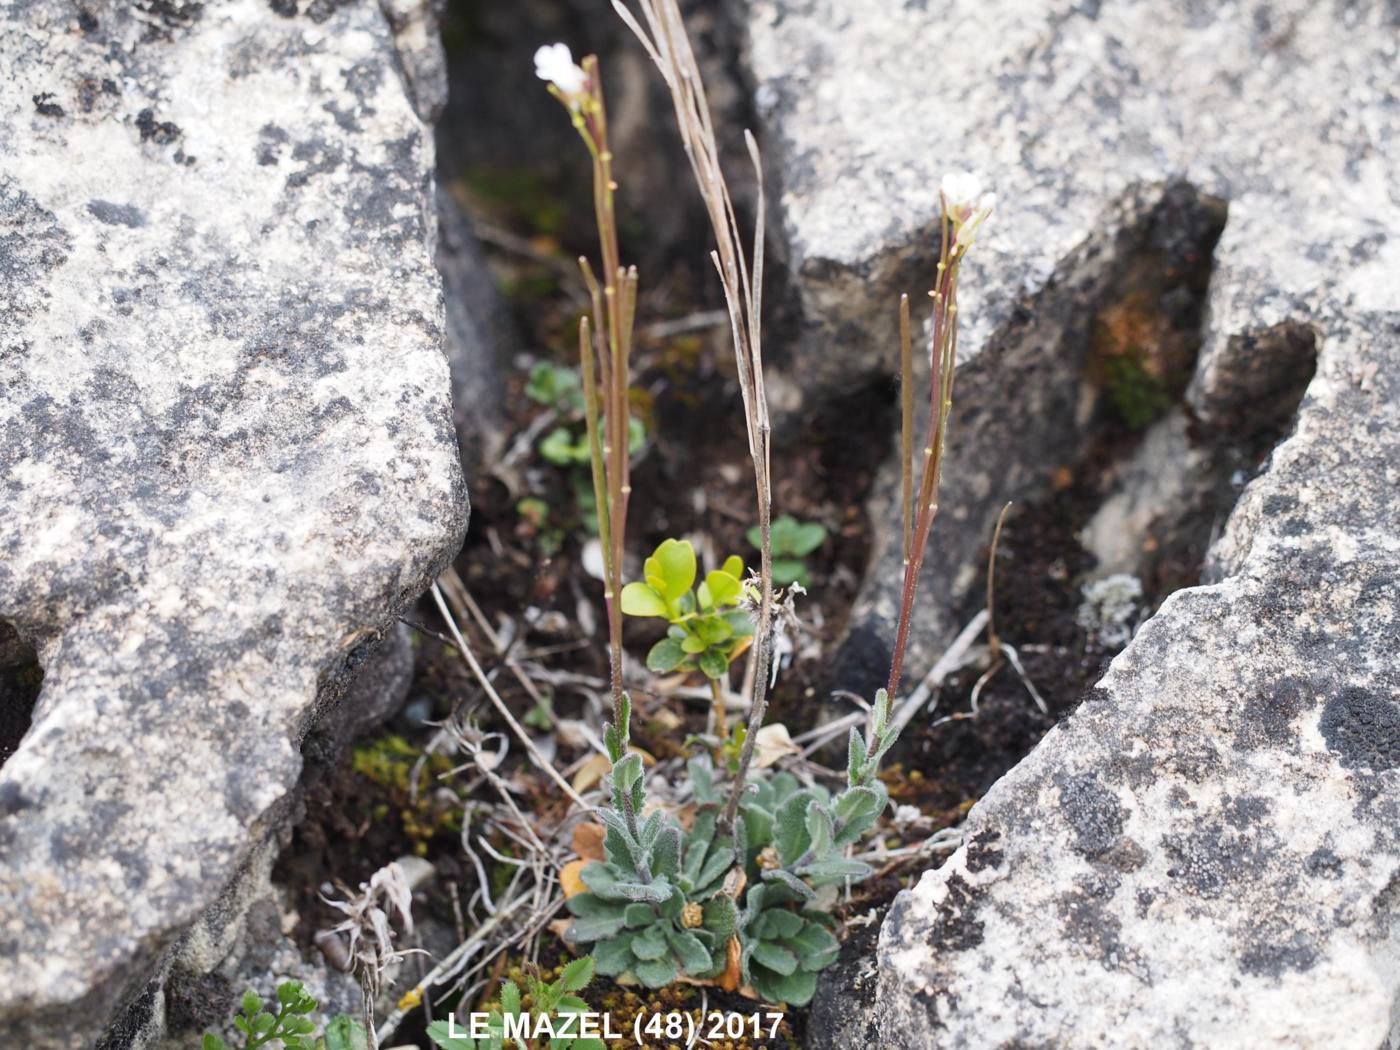 Rock-cress, [Hilly] plant